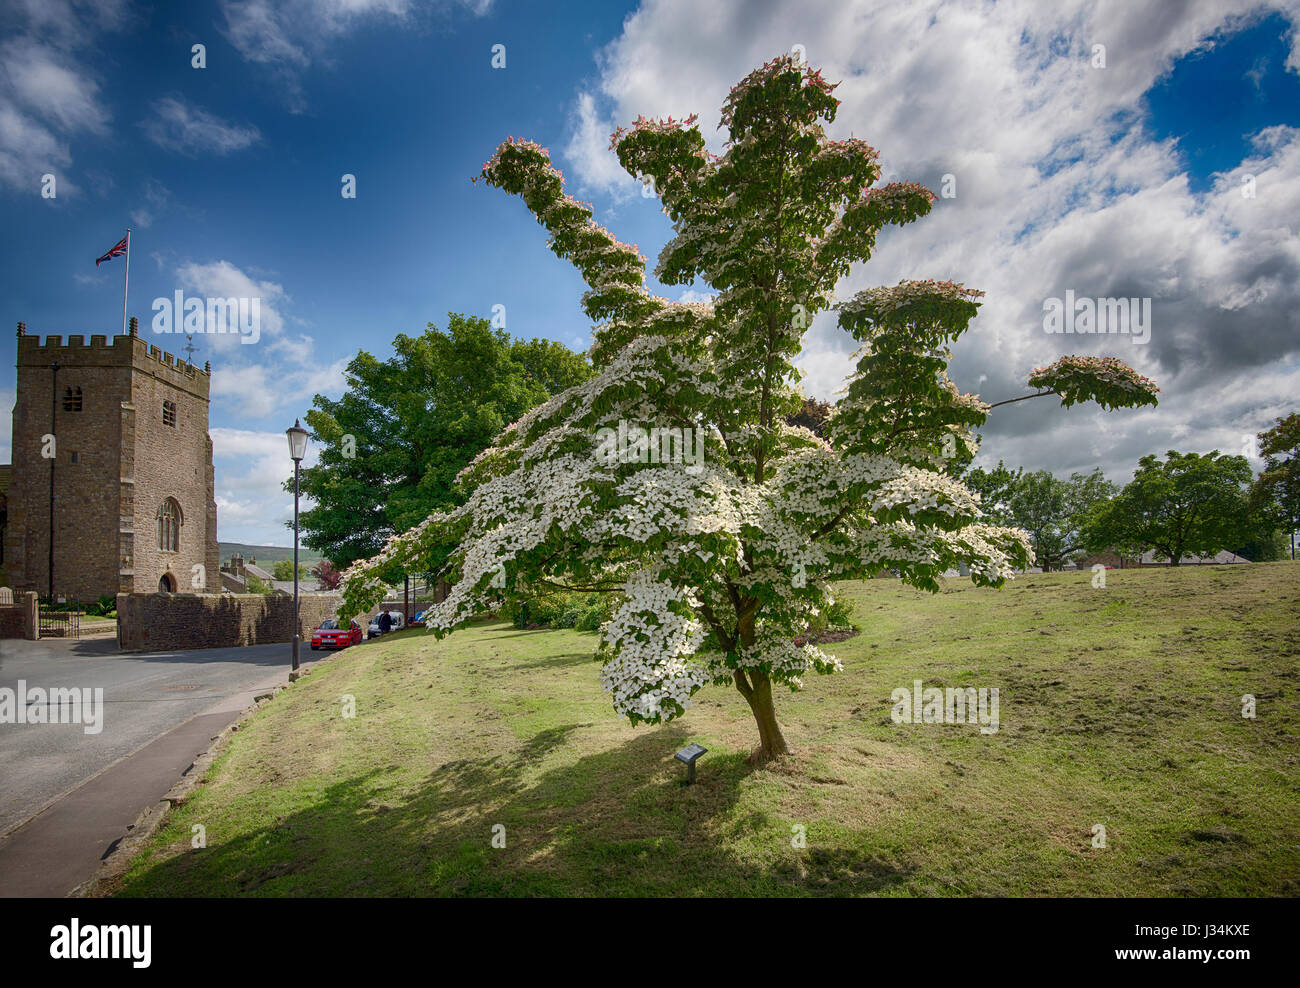 American Pink Dogwood tree in flower, Chipping, Lancashire. Stock Photo